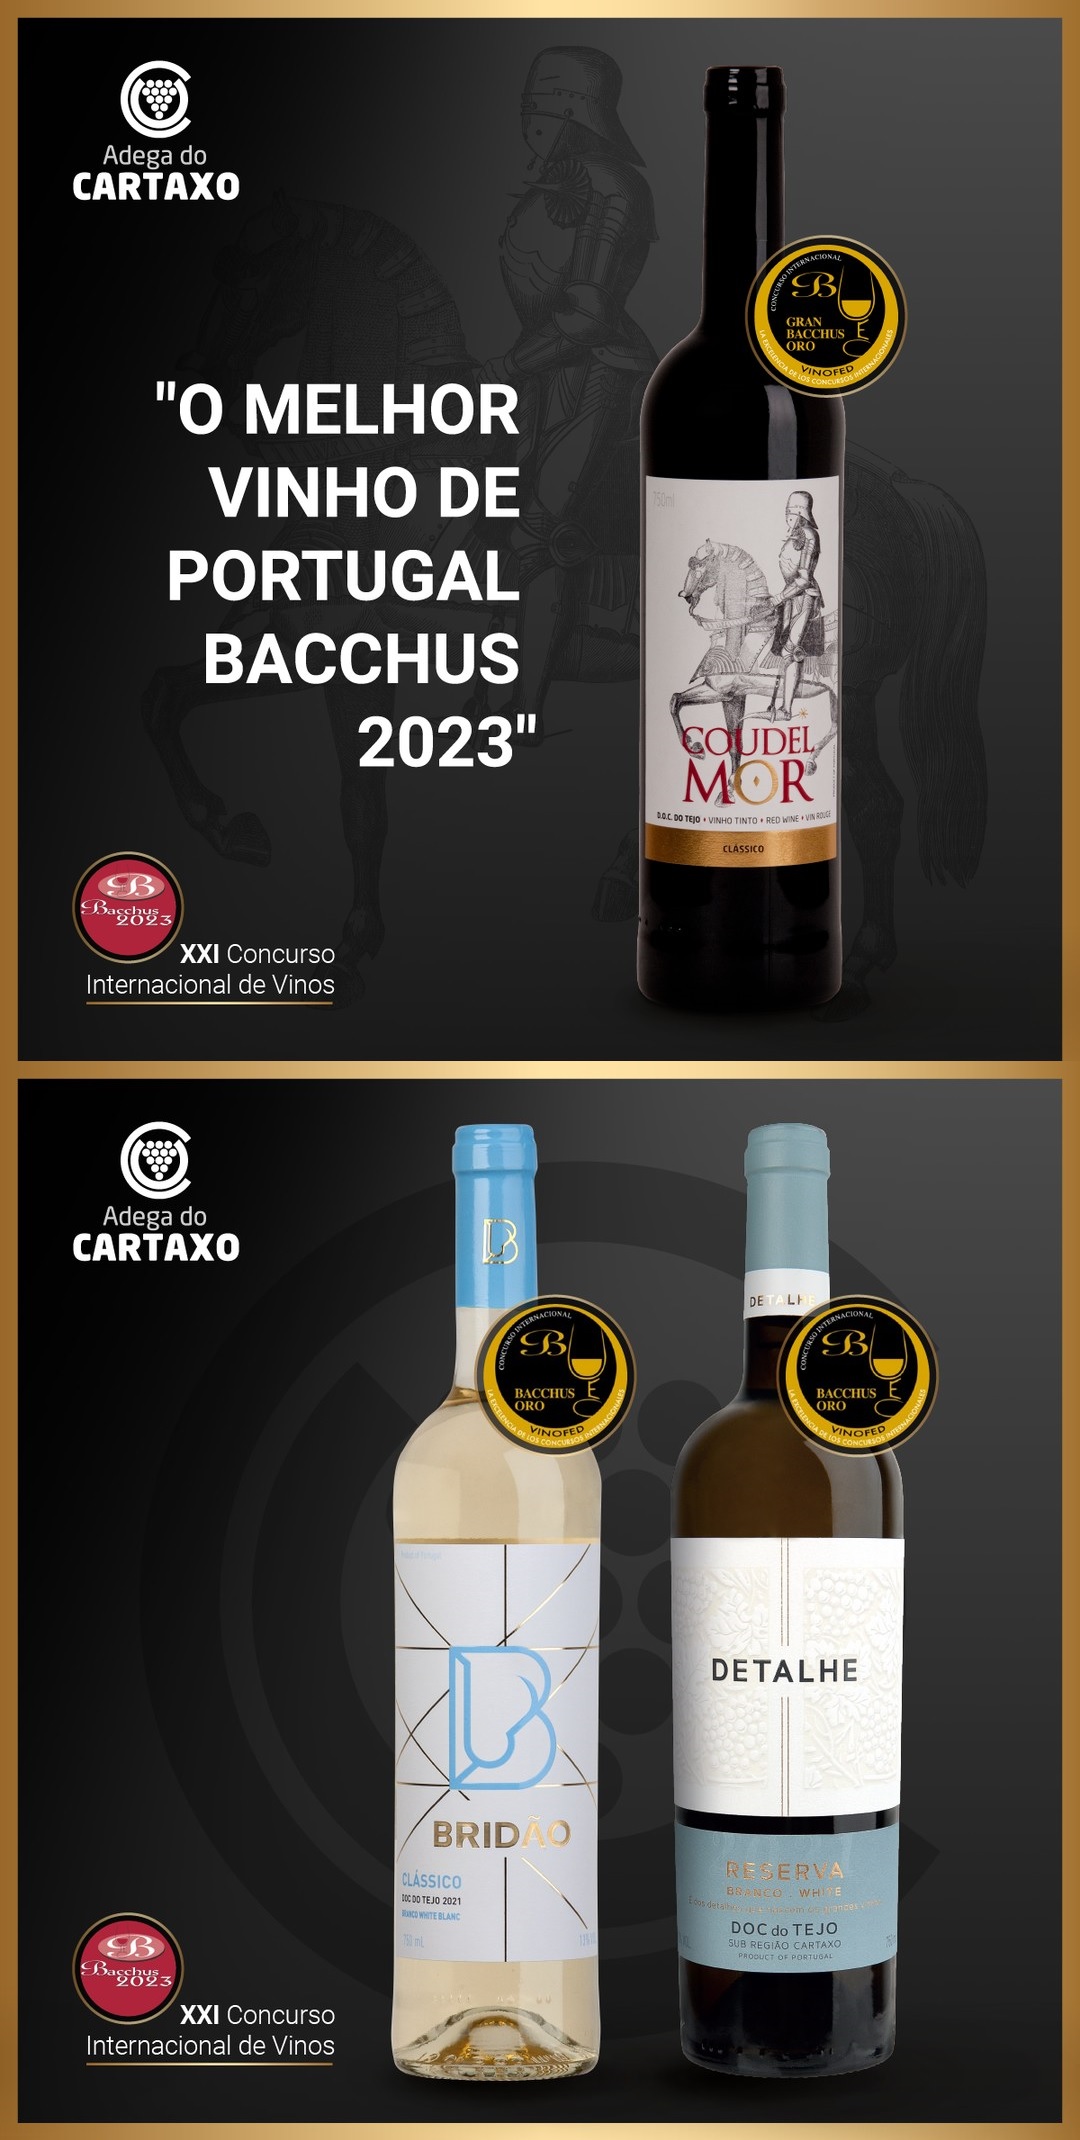 “The Best Wine of Portugal“